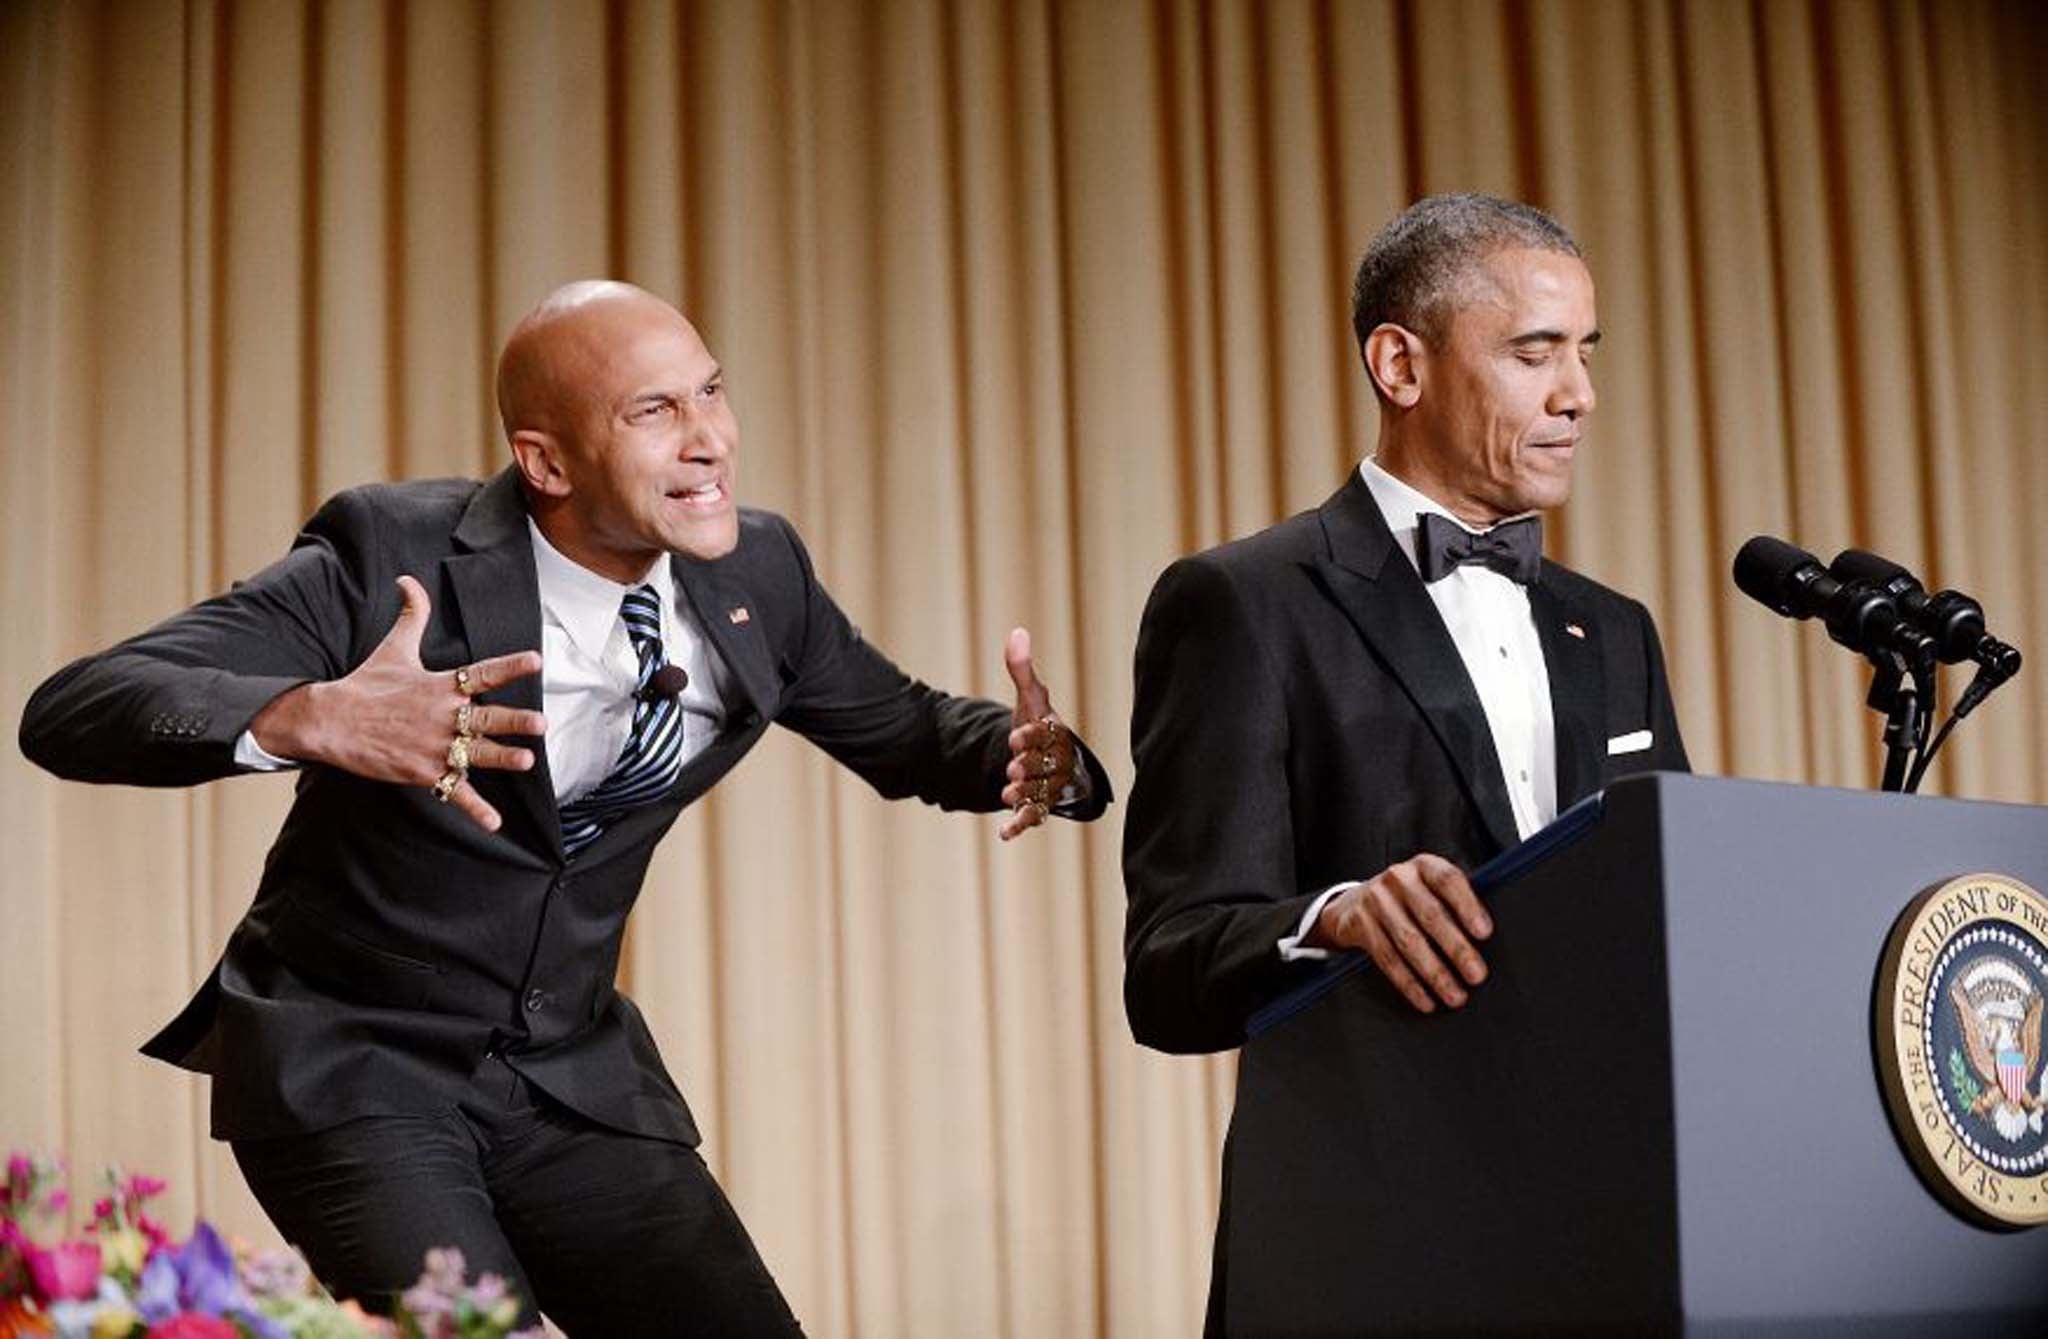 Keegan-Michael Key from Key & Peele and Barack Obama perform at the annual White House Correspondent's Association Gala